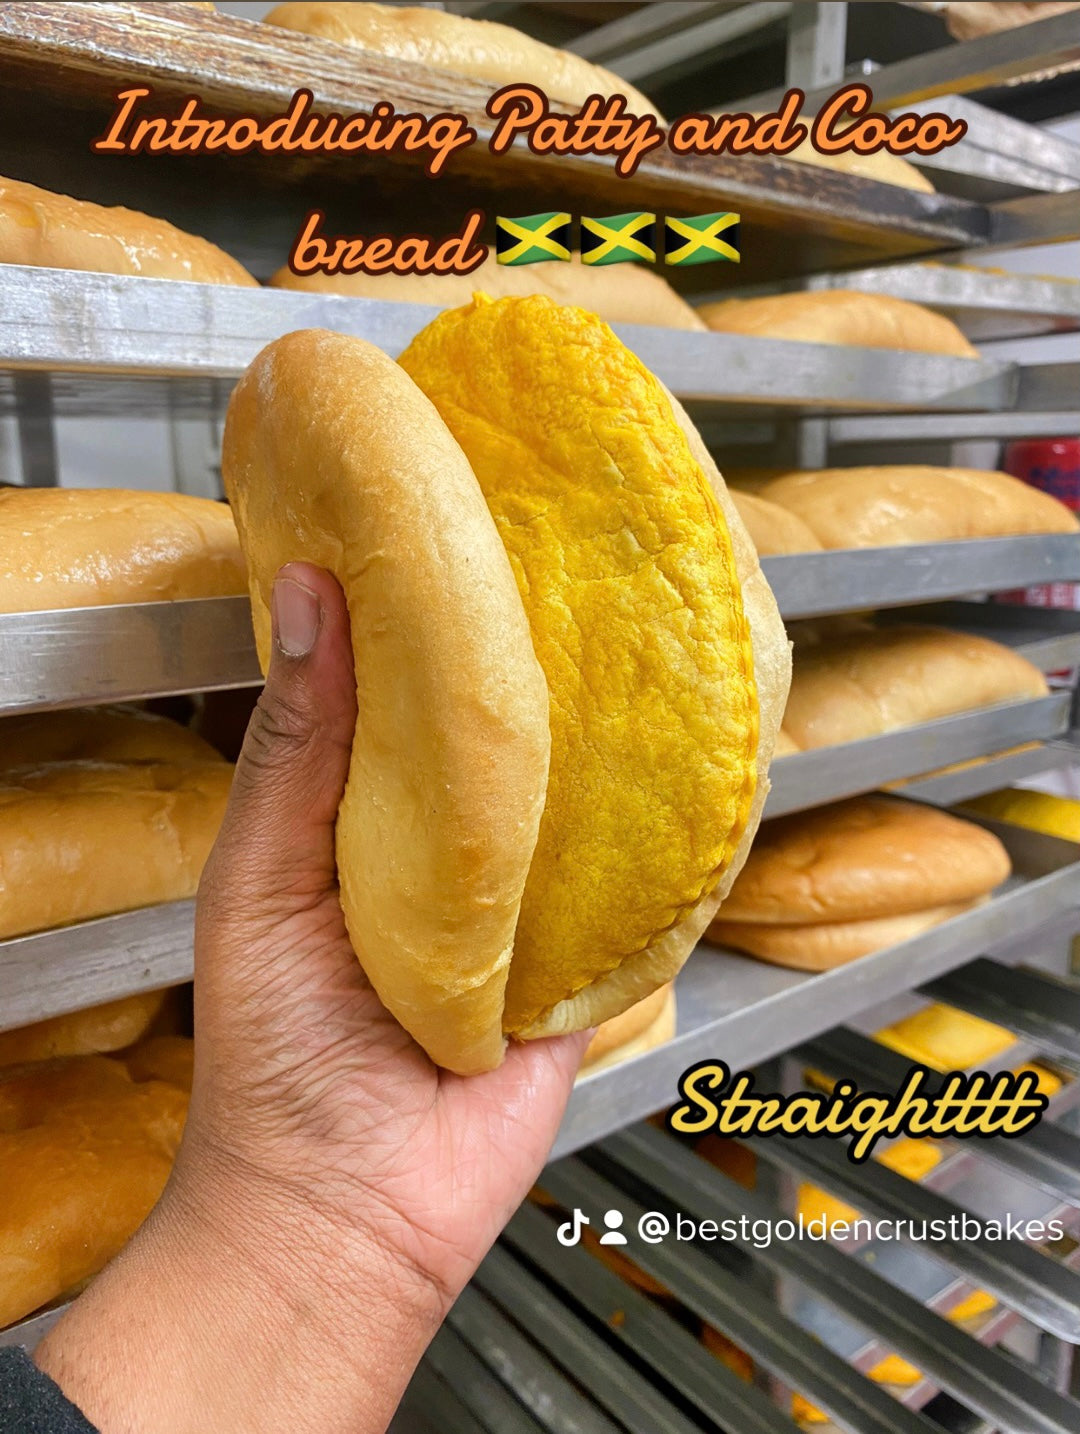 With delivery Sample Box Jamaican Patties